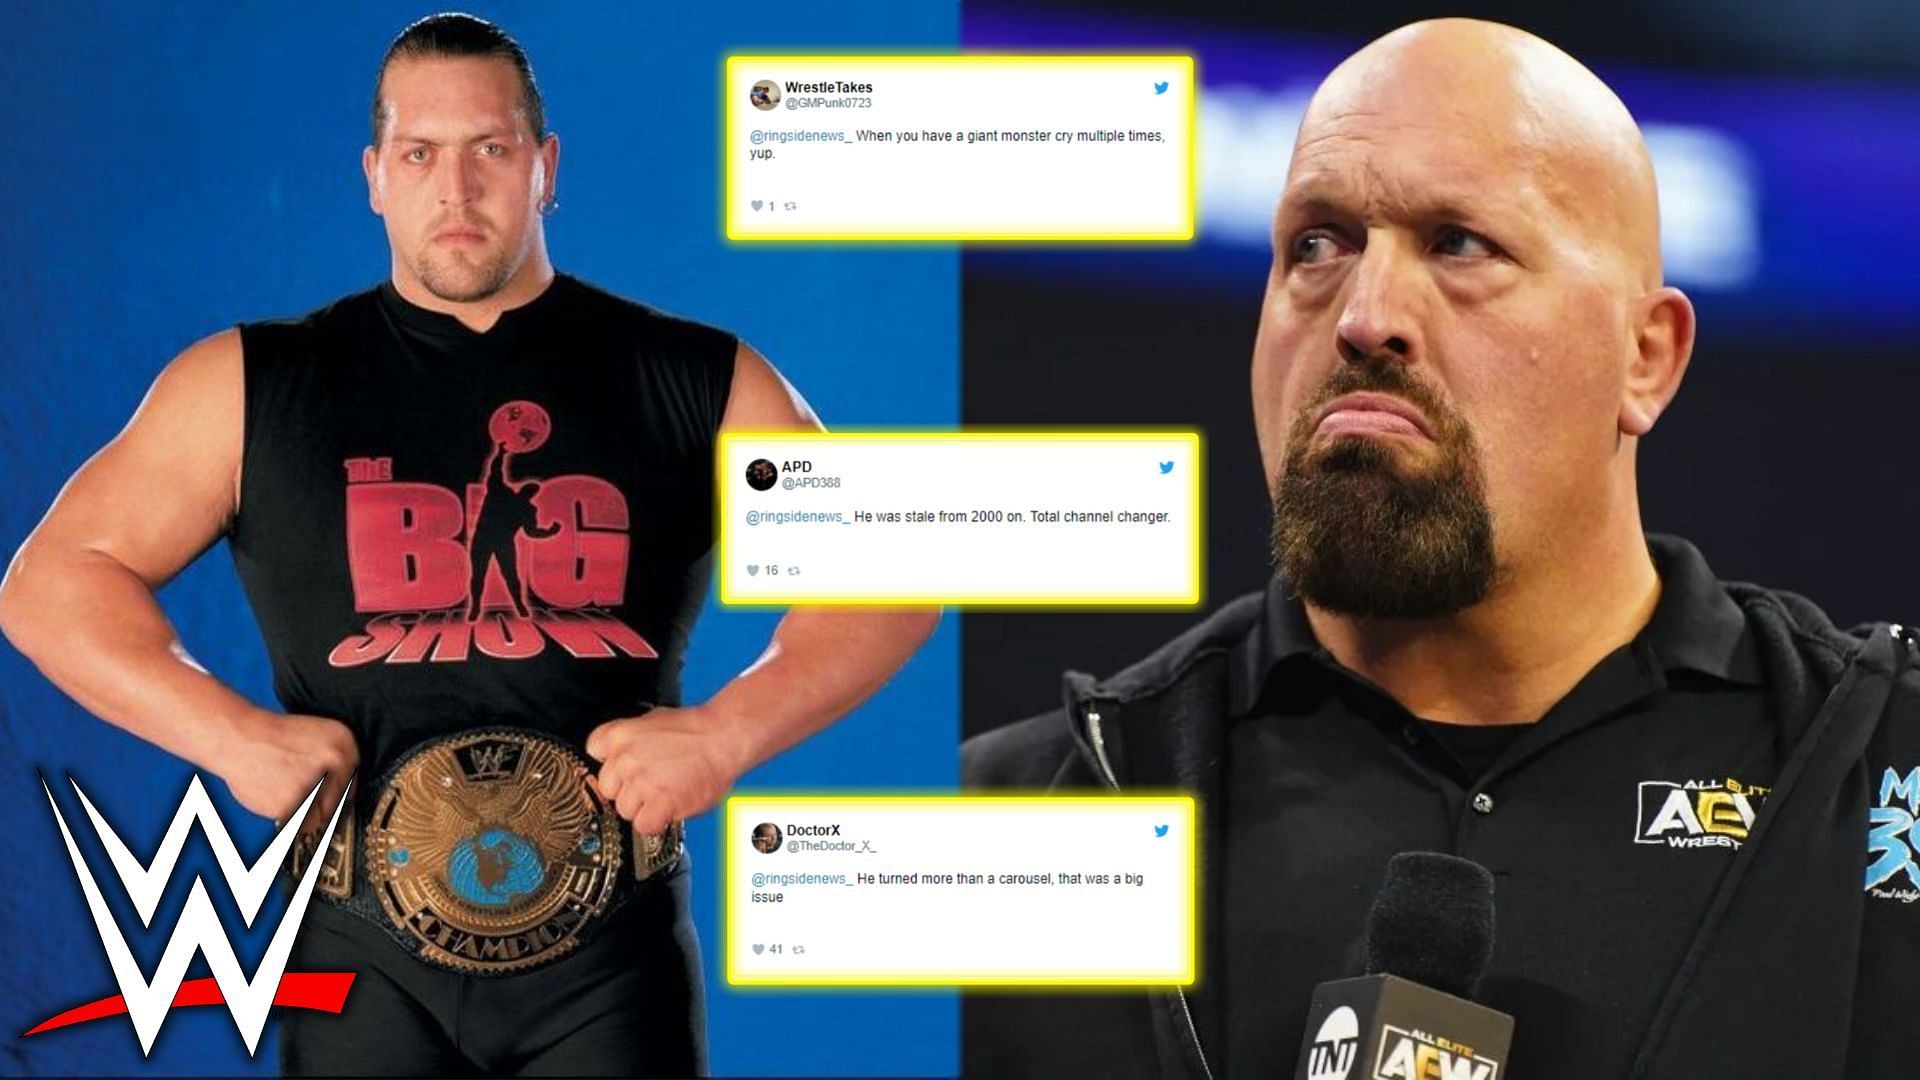 Was Big Show mishandled during his long tenure with WWE?